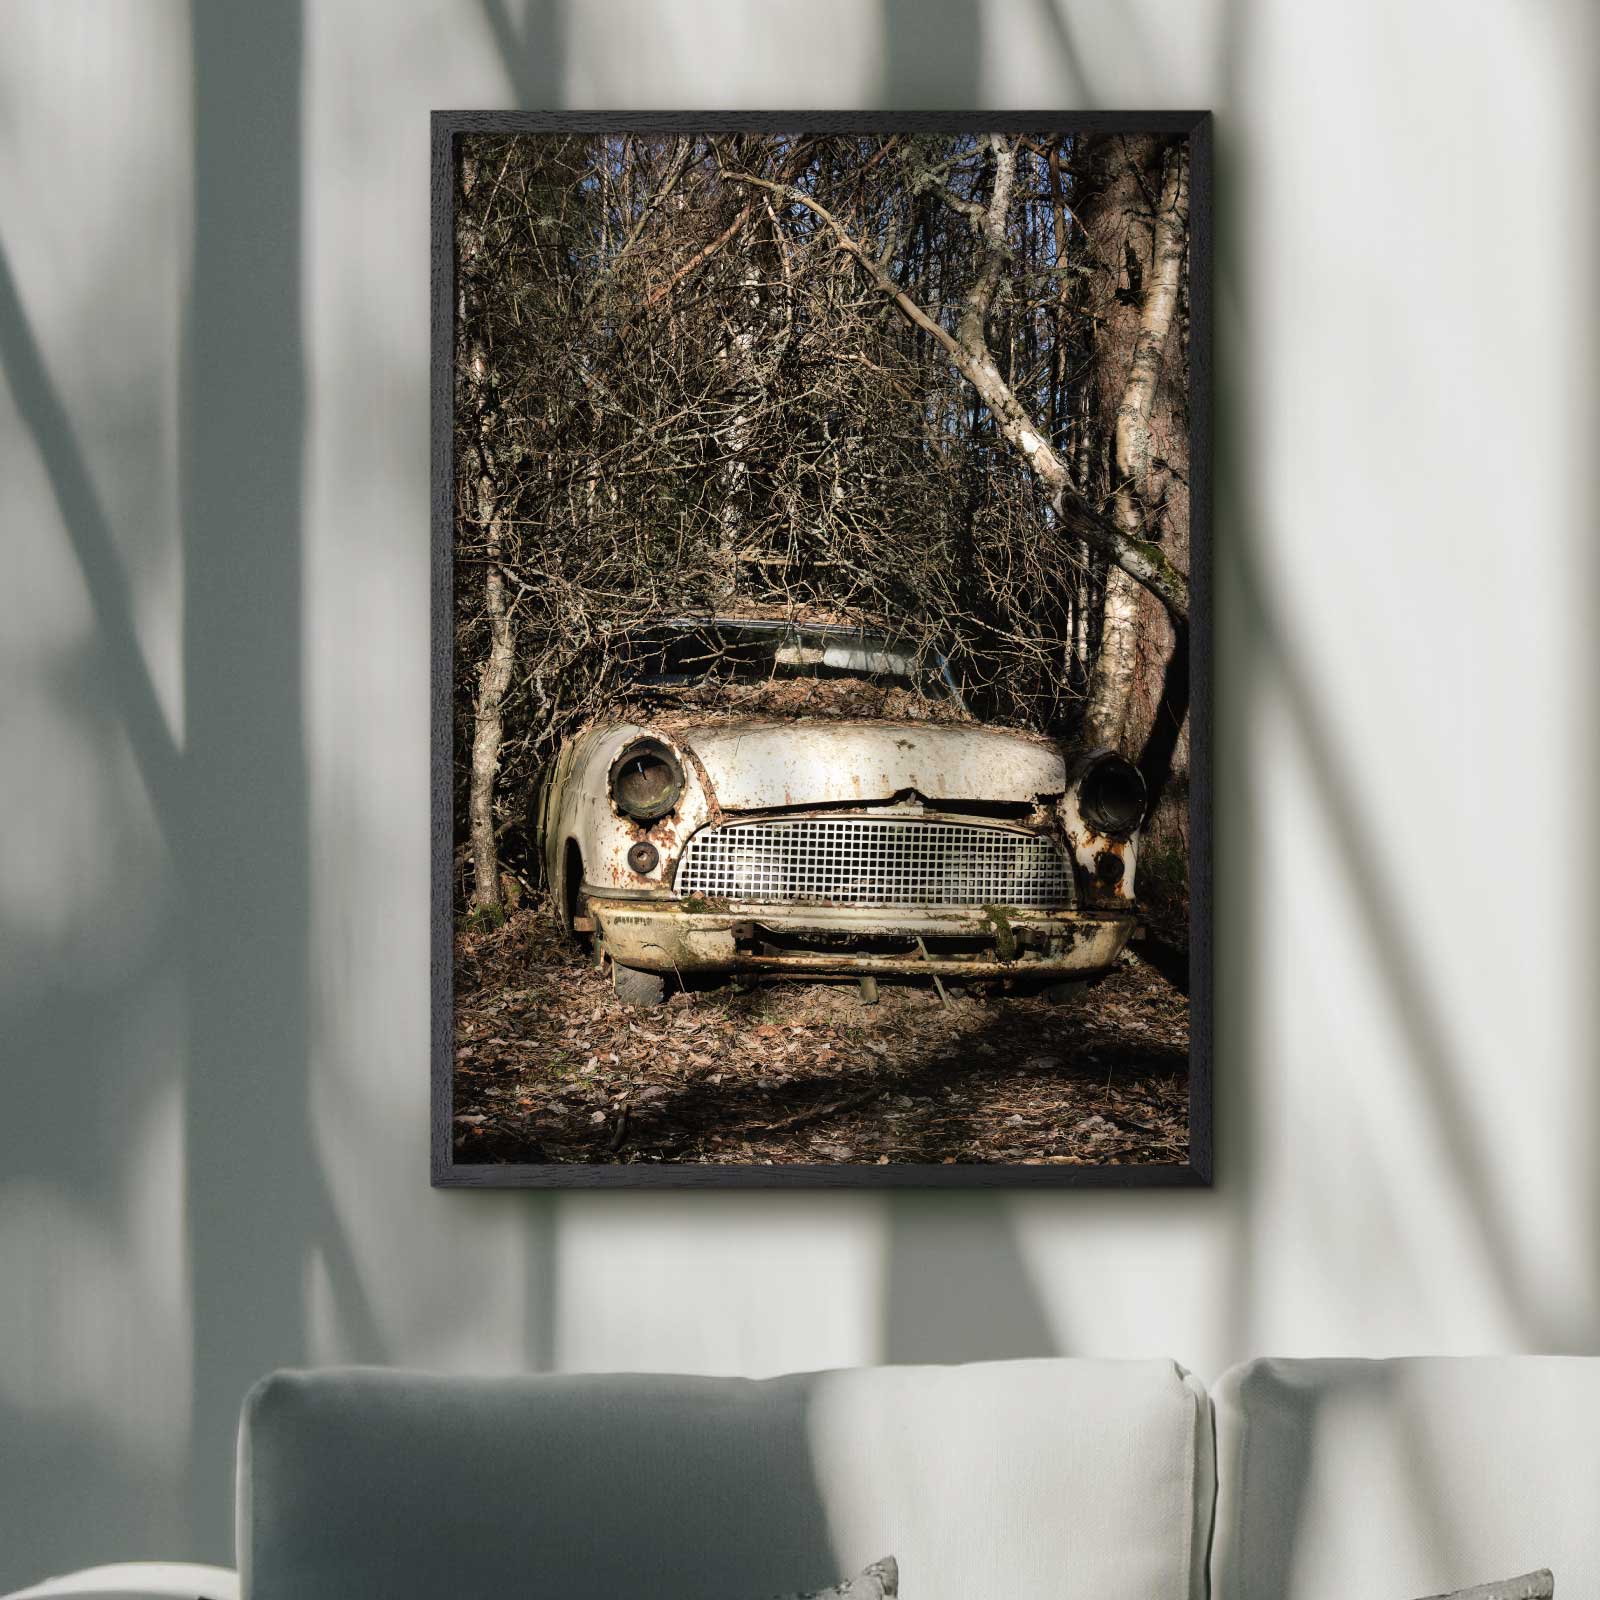 poster with a rusty carwreck out in a forest